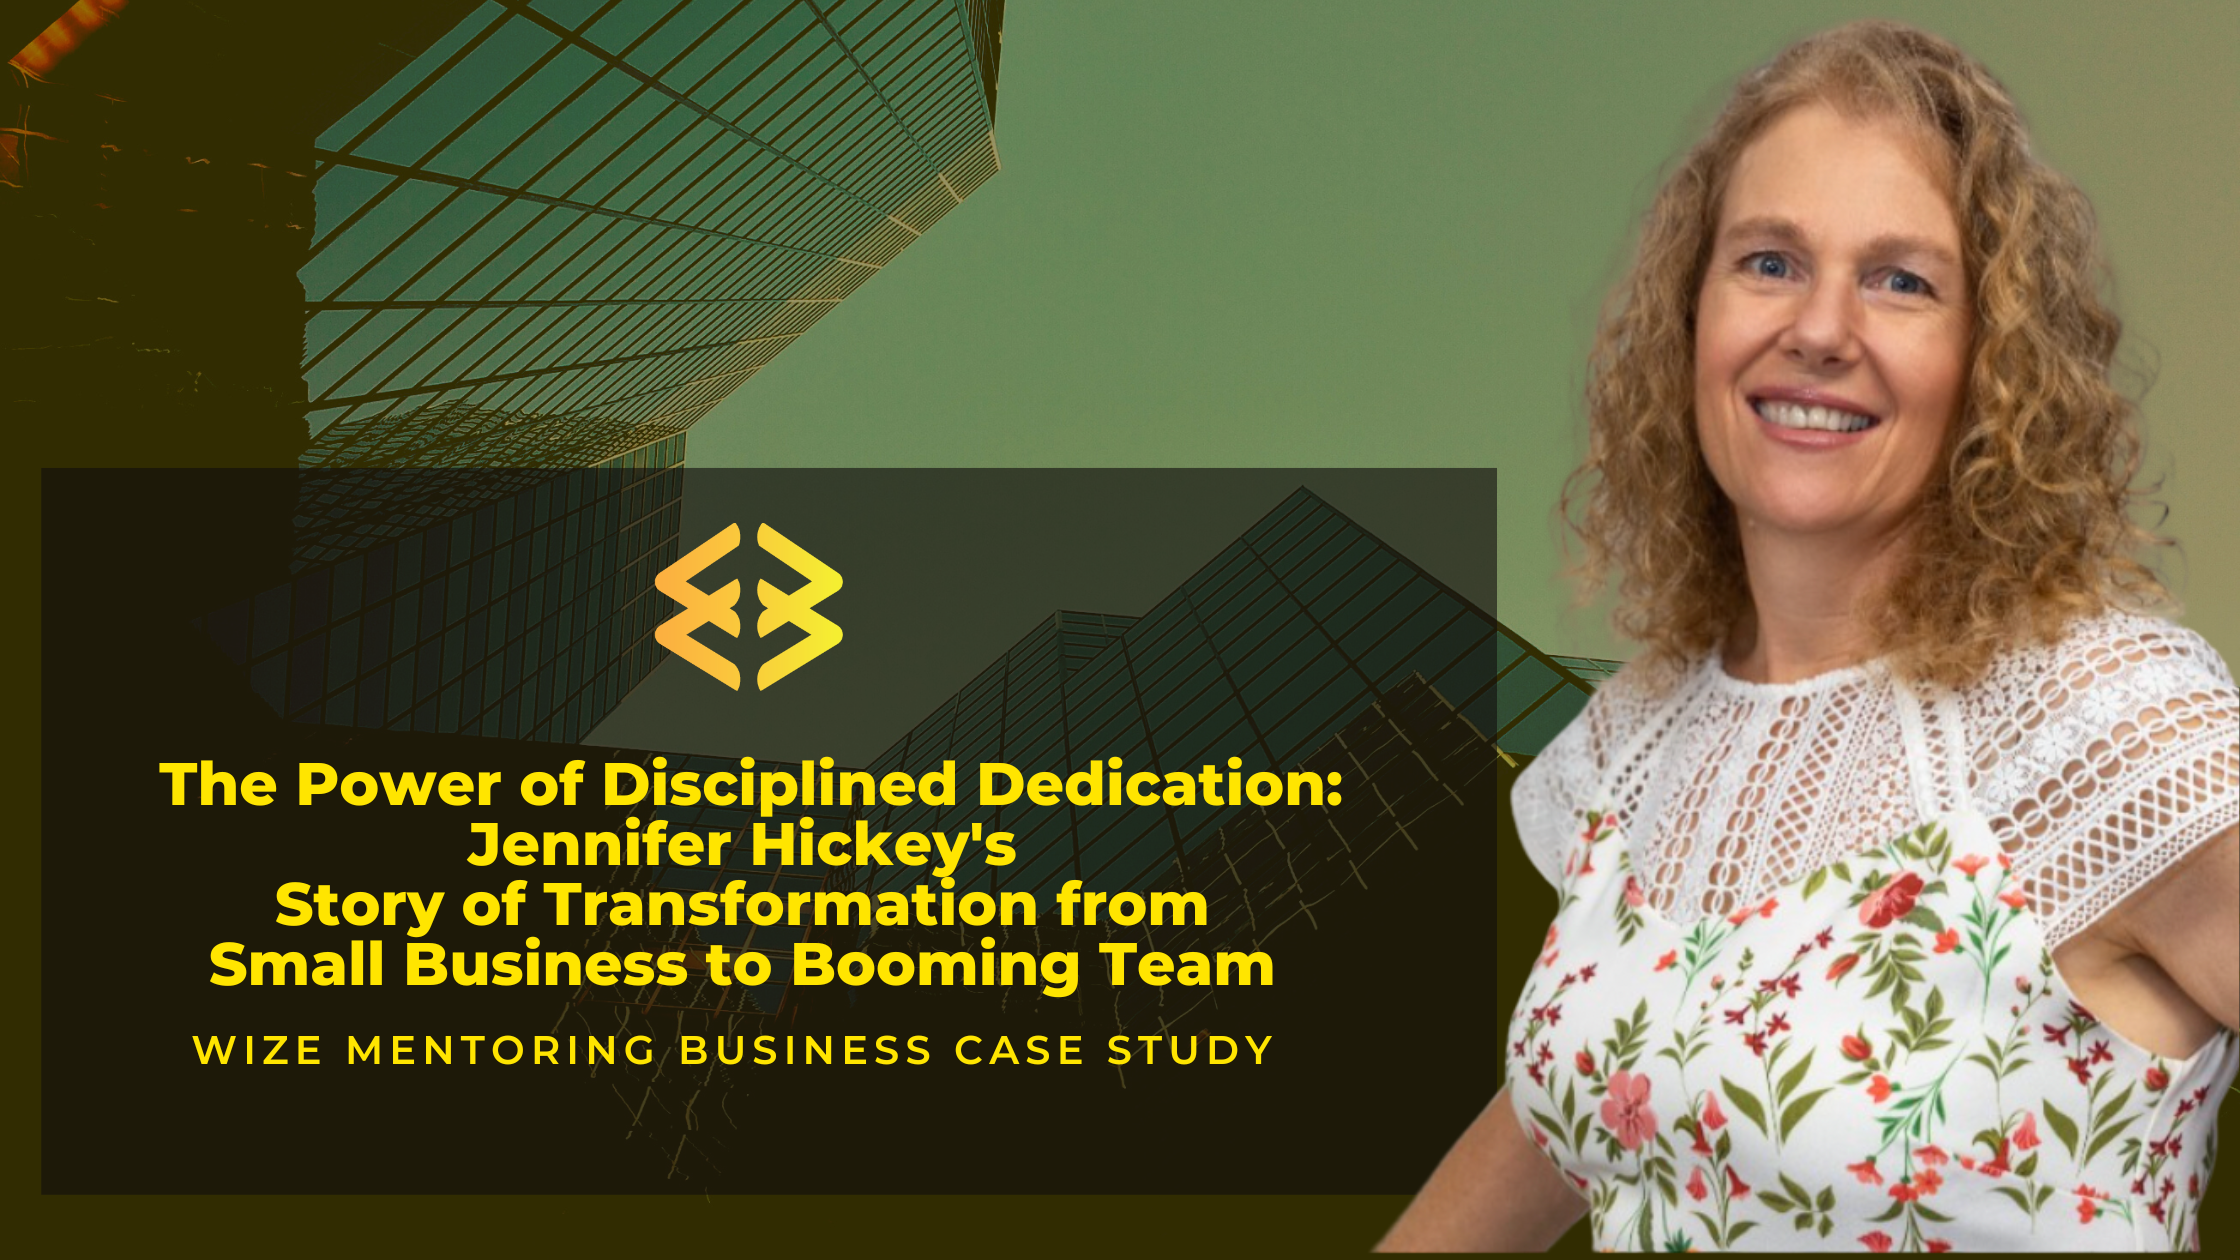 The Power of Disciplined Dedication: Jennifer Hickey's Story of Transformation from Small Business to Booming Team